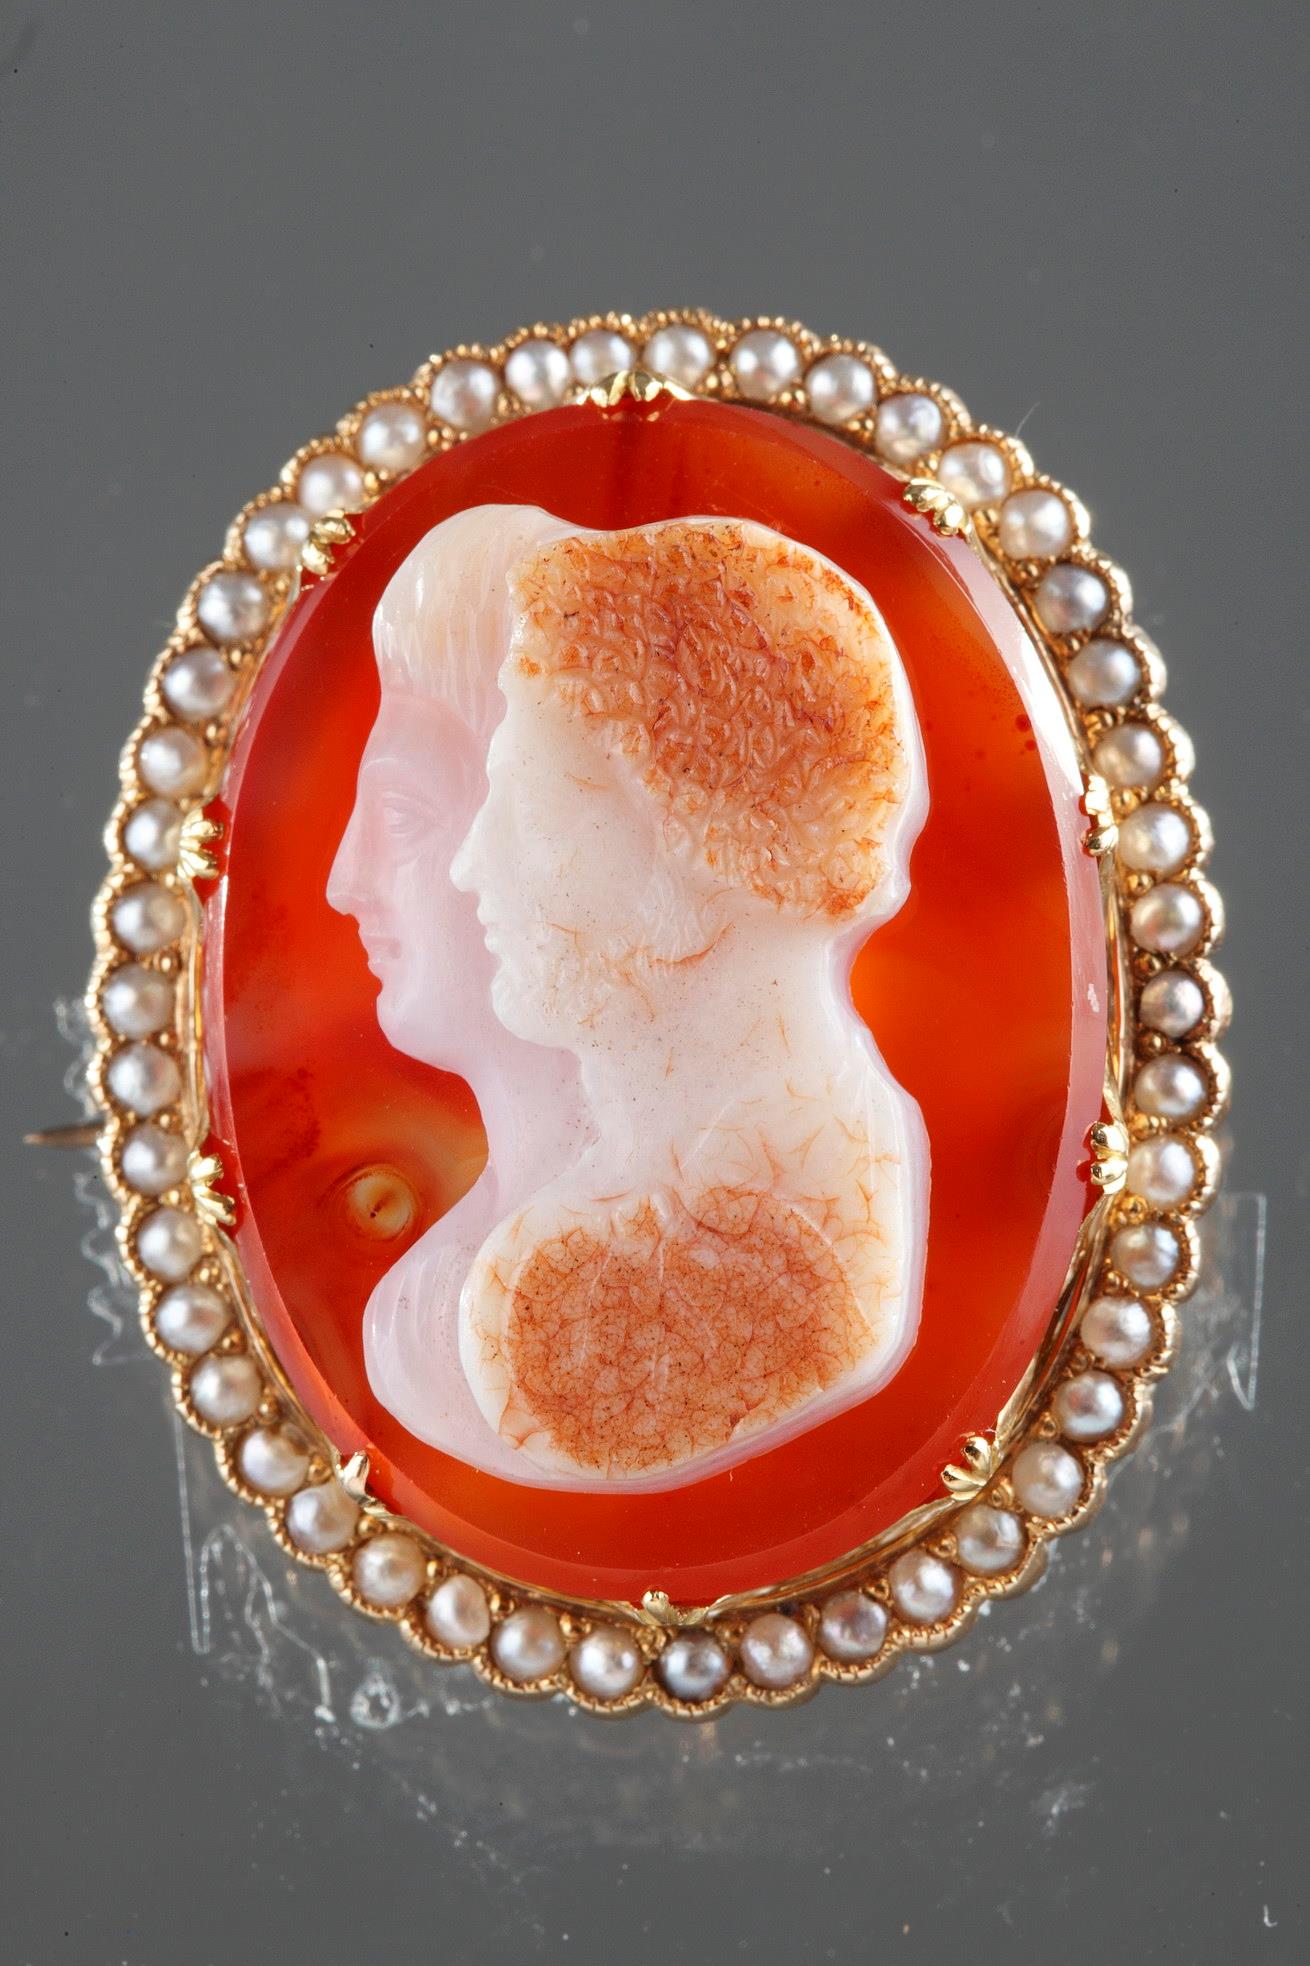 Napoleon III Gold-Mounted Agate Cameo Brooch.
19th century.